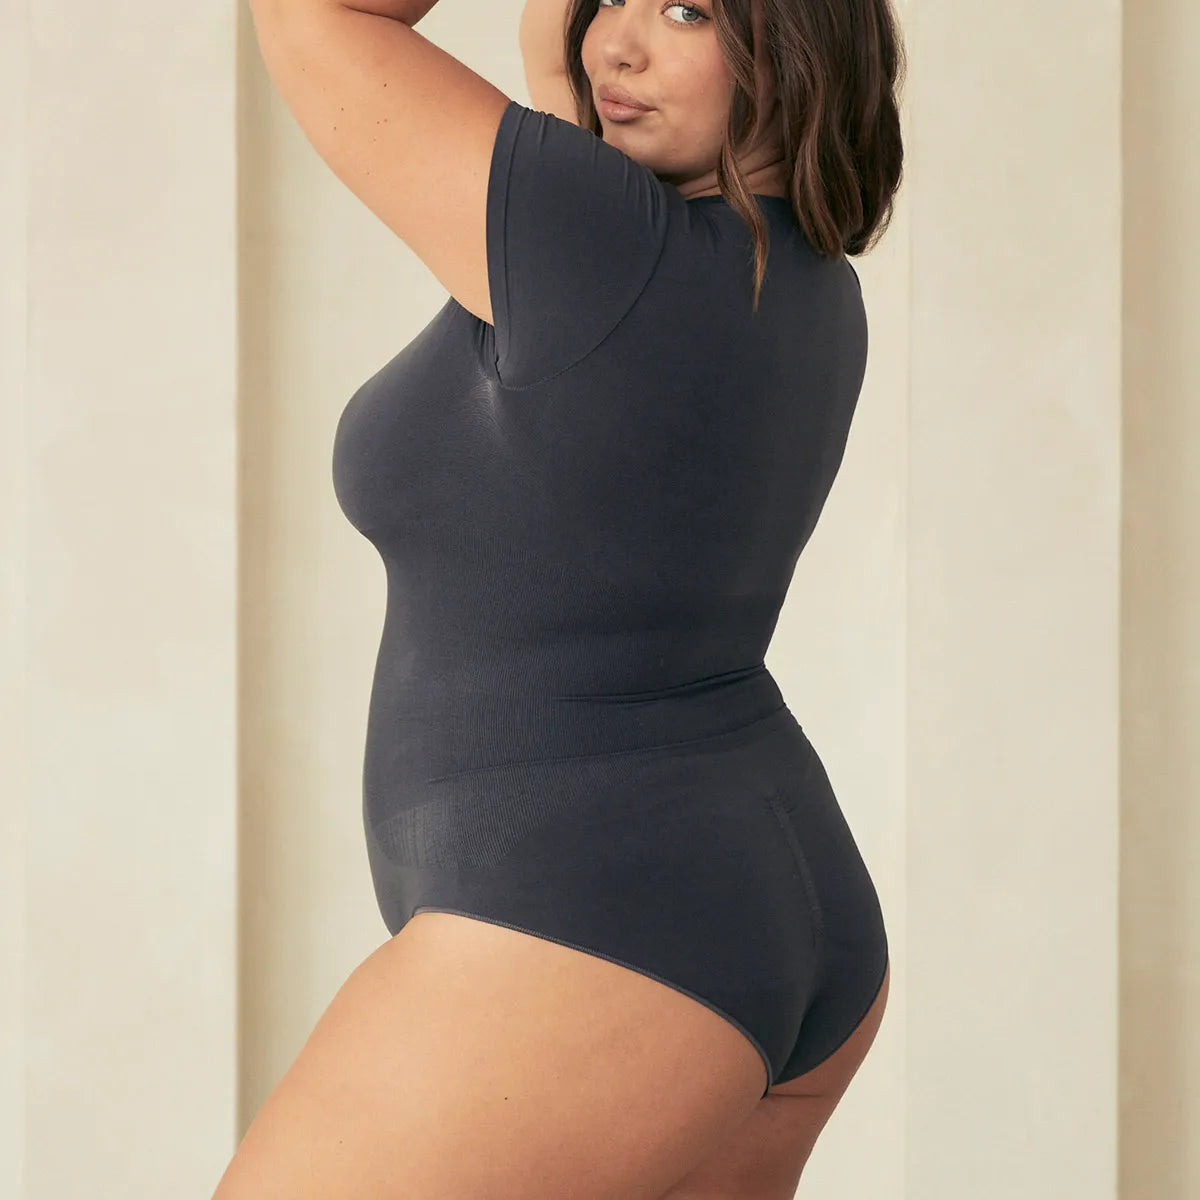 Omg these bodysuits are amazing 10/10 🤩 #pinsyshapewear #pinsy